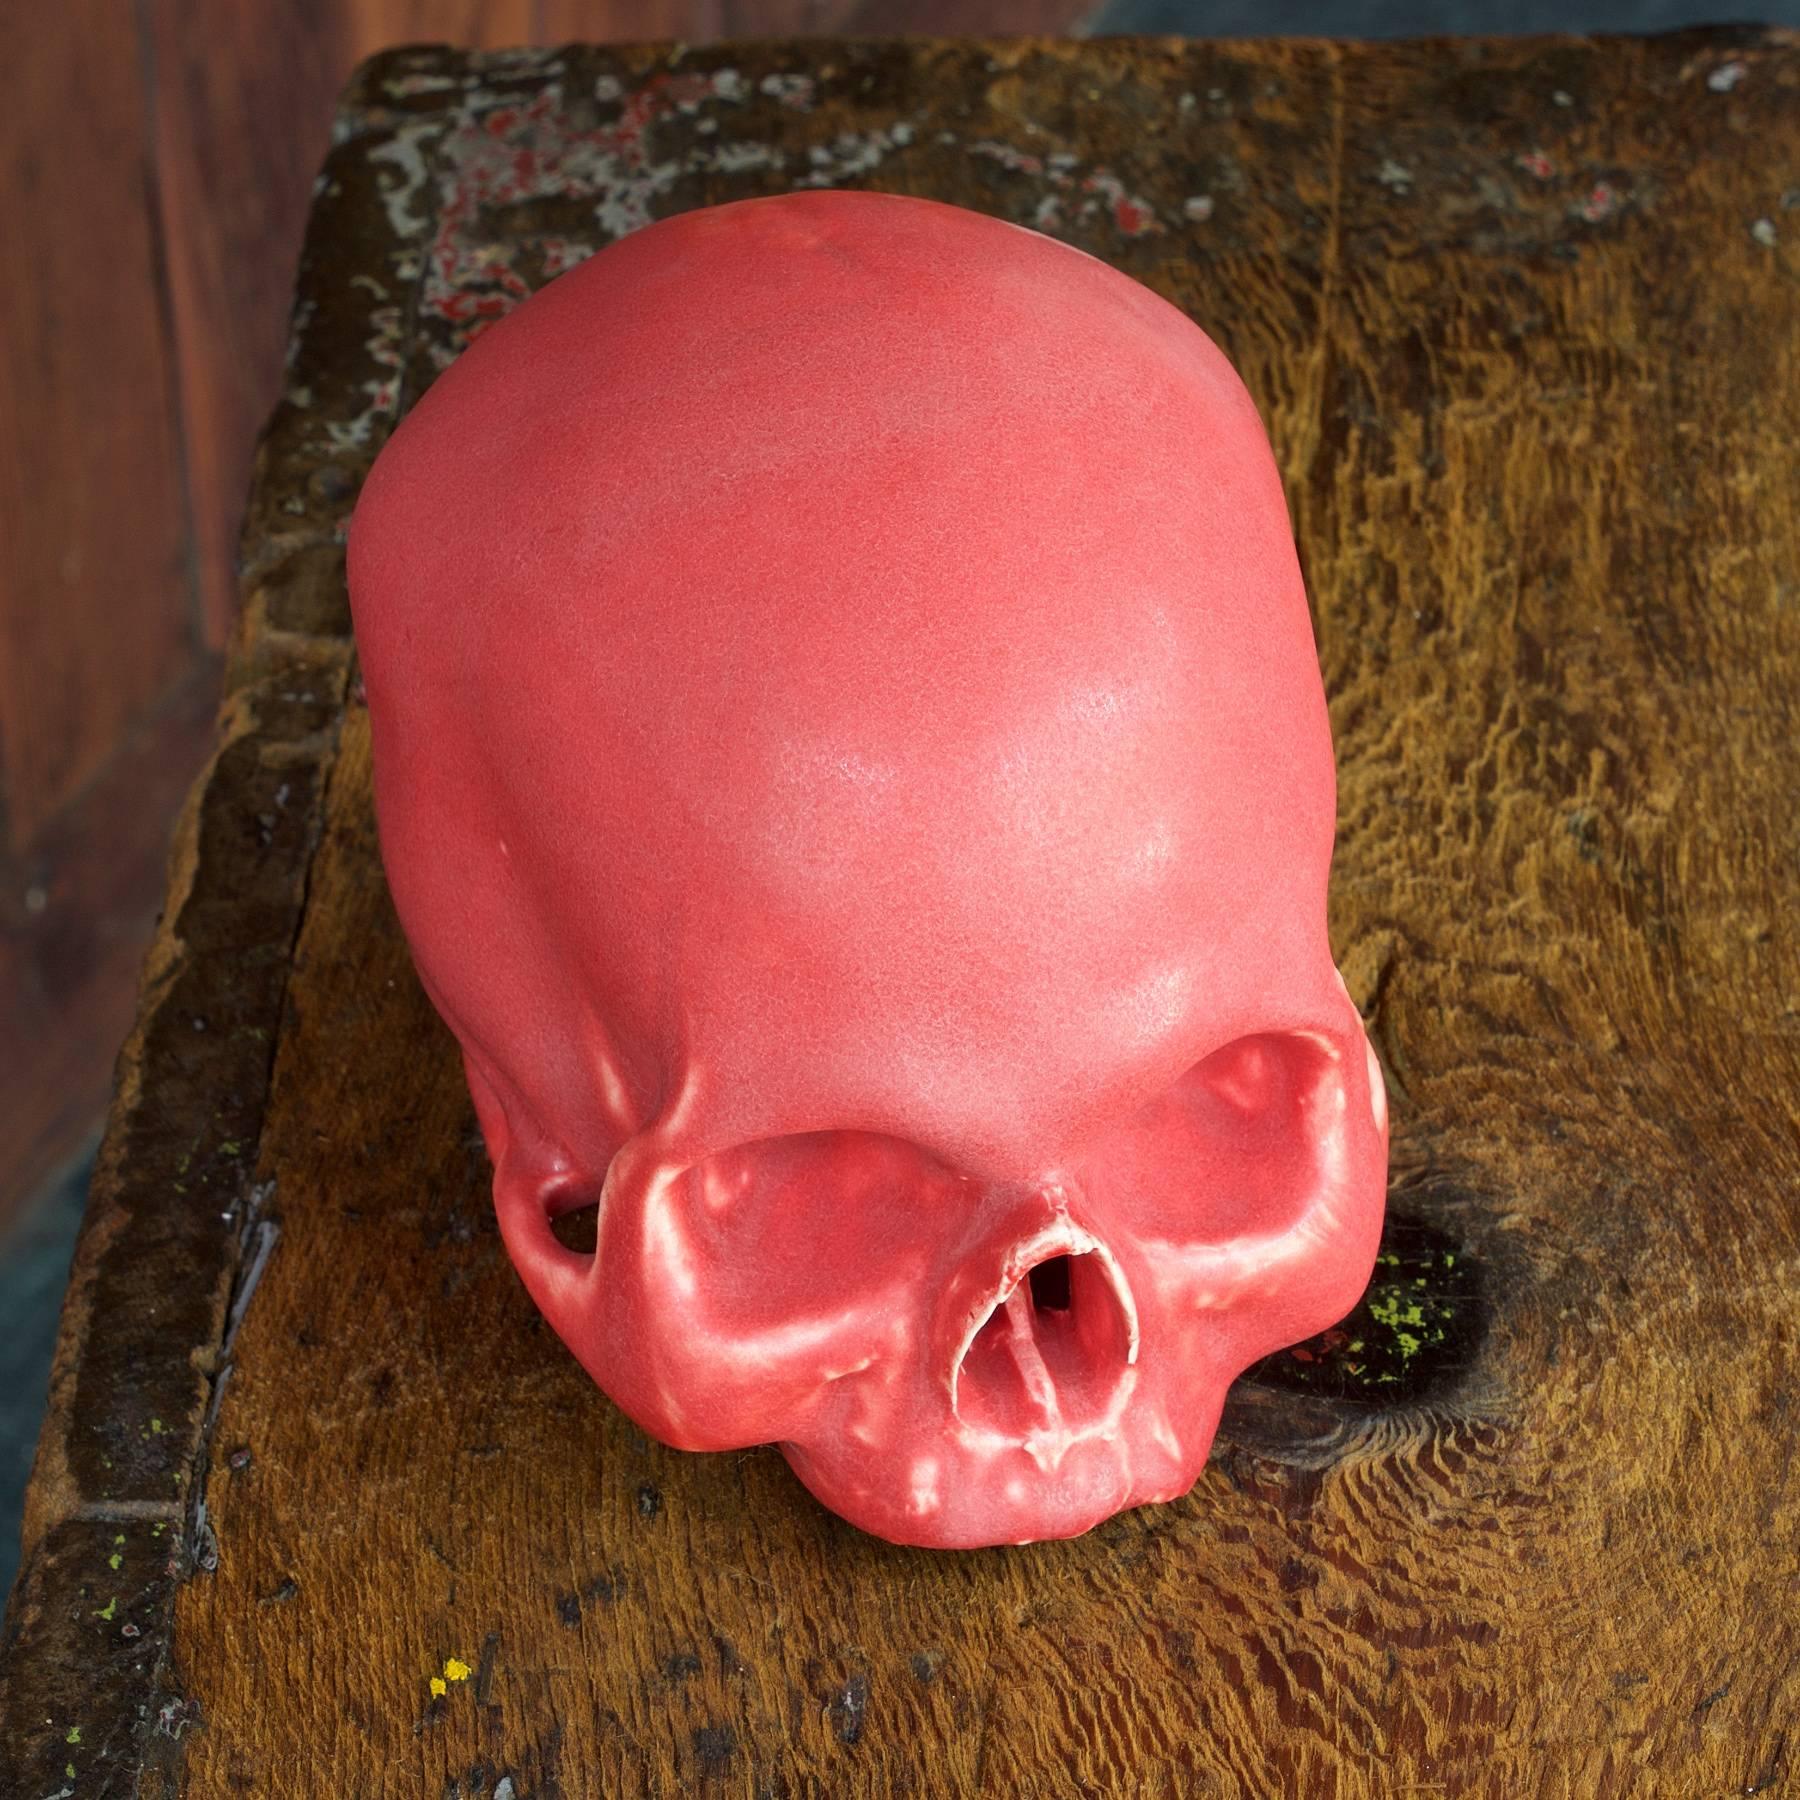 American Anatomic Human Skull in Red Glazed Pottery as Art Sculpture Bookend